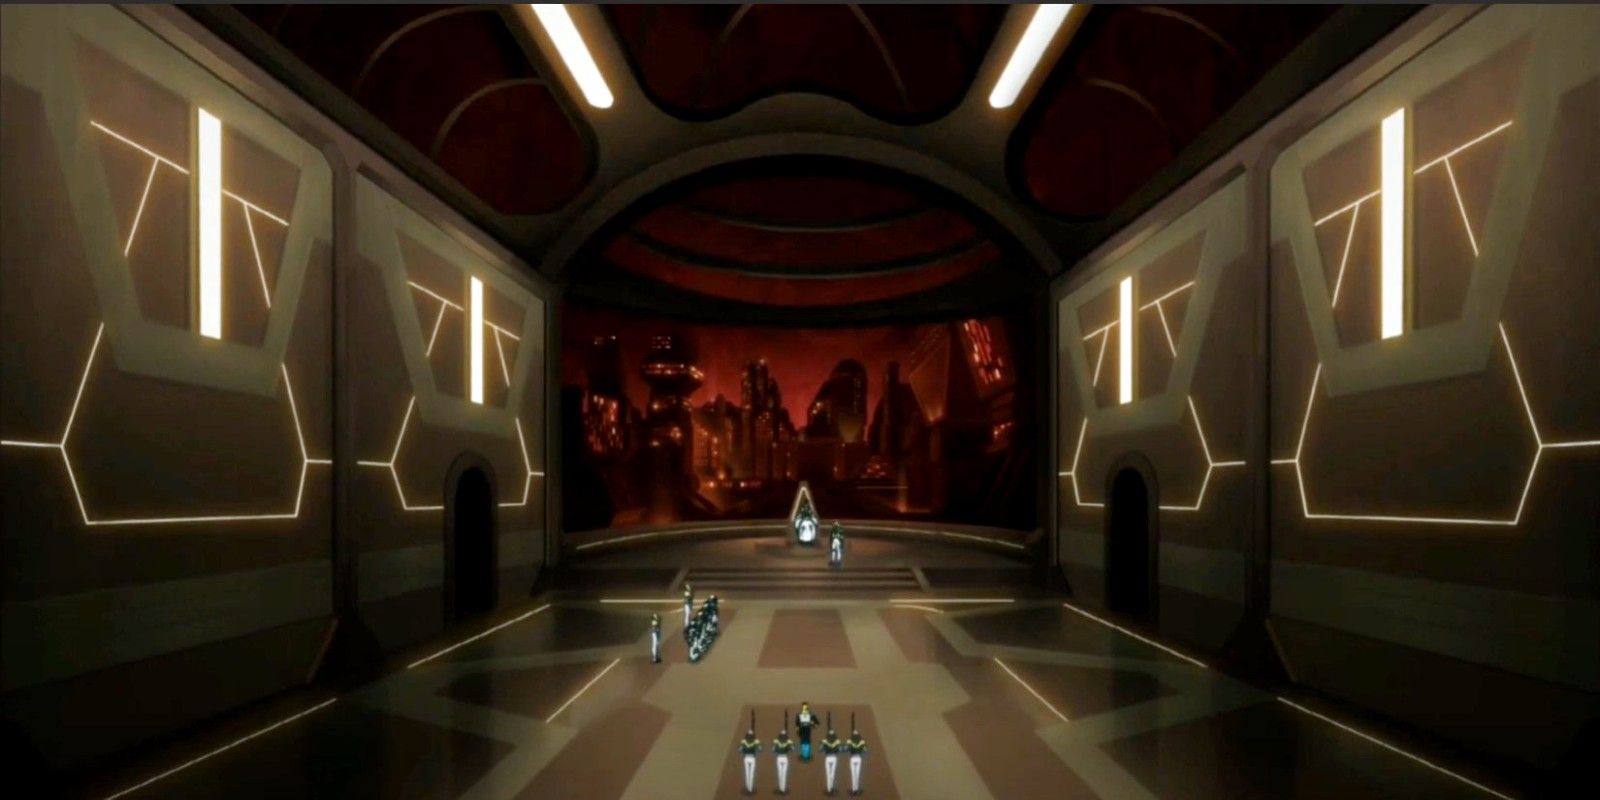 The throne room of Mars in Invincible